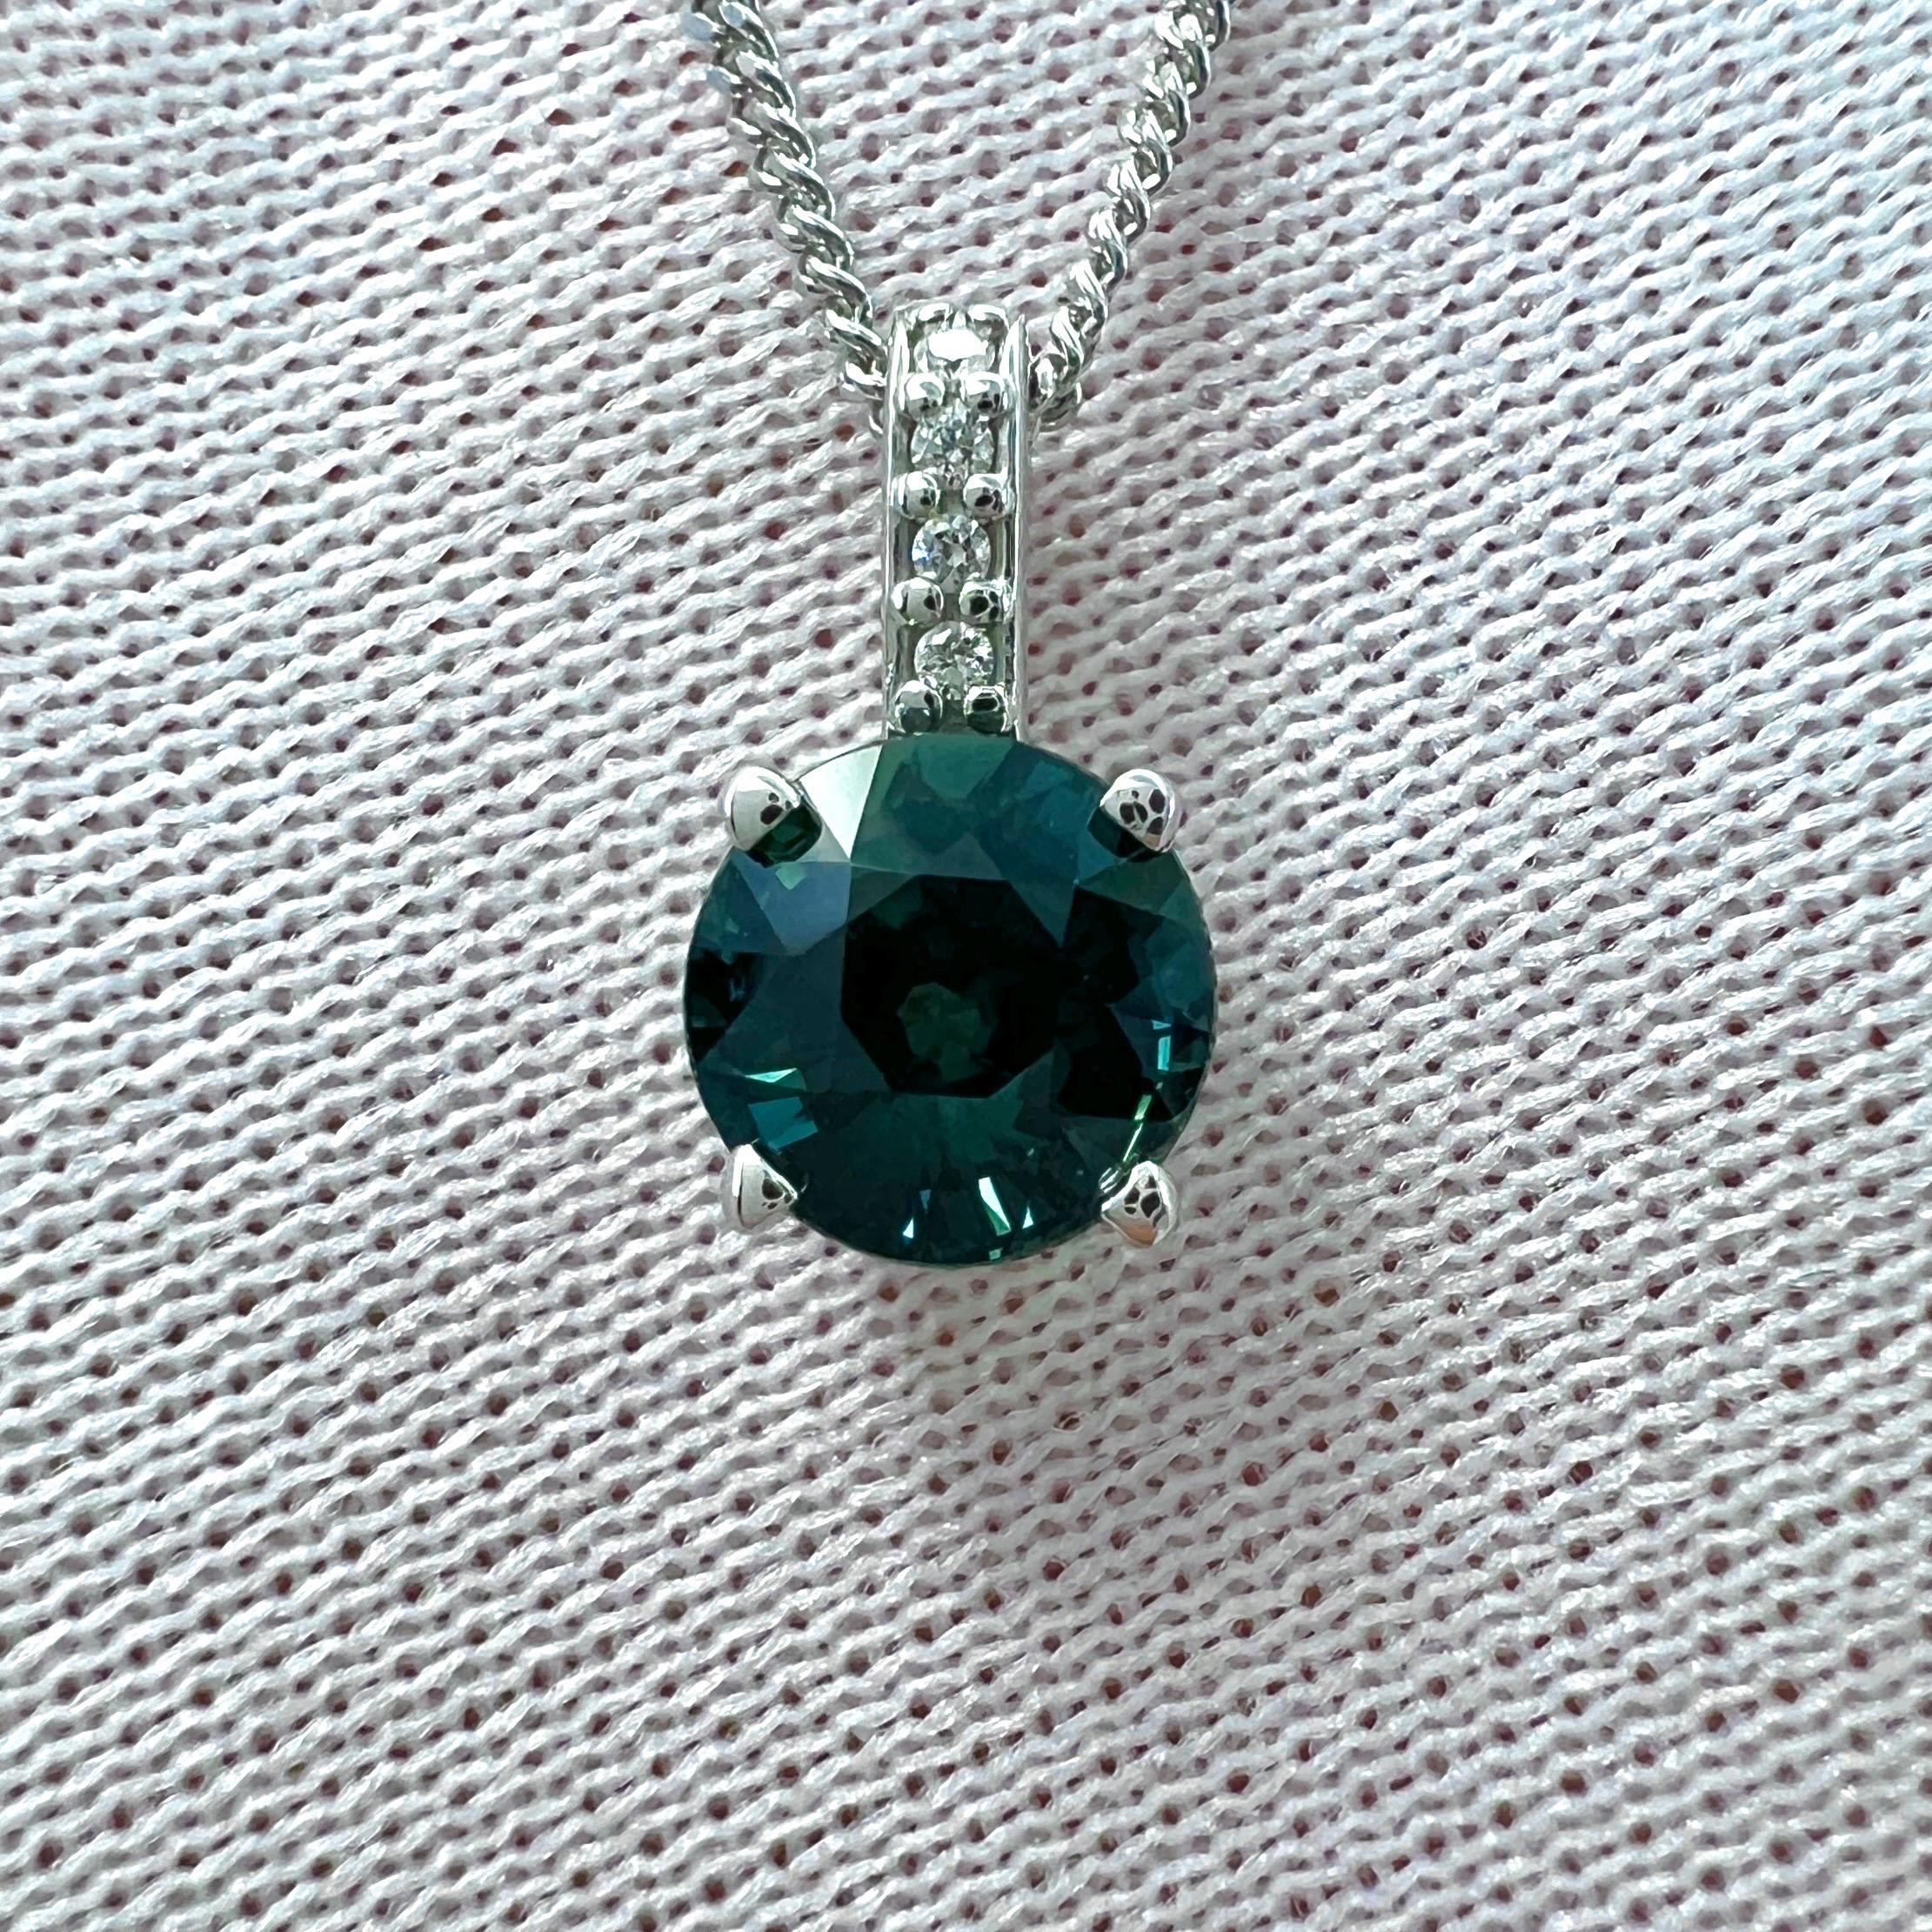 IGI Certified Untreated Green-Blue Teal Sapphire & Diamond 18k White Gold Pendant.

1.04 Carat sapphire with fine deep green blue 'teal' colour and very good clarity, VS. Also has an excellent round cut which displays the fine colour to best